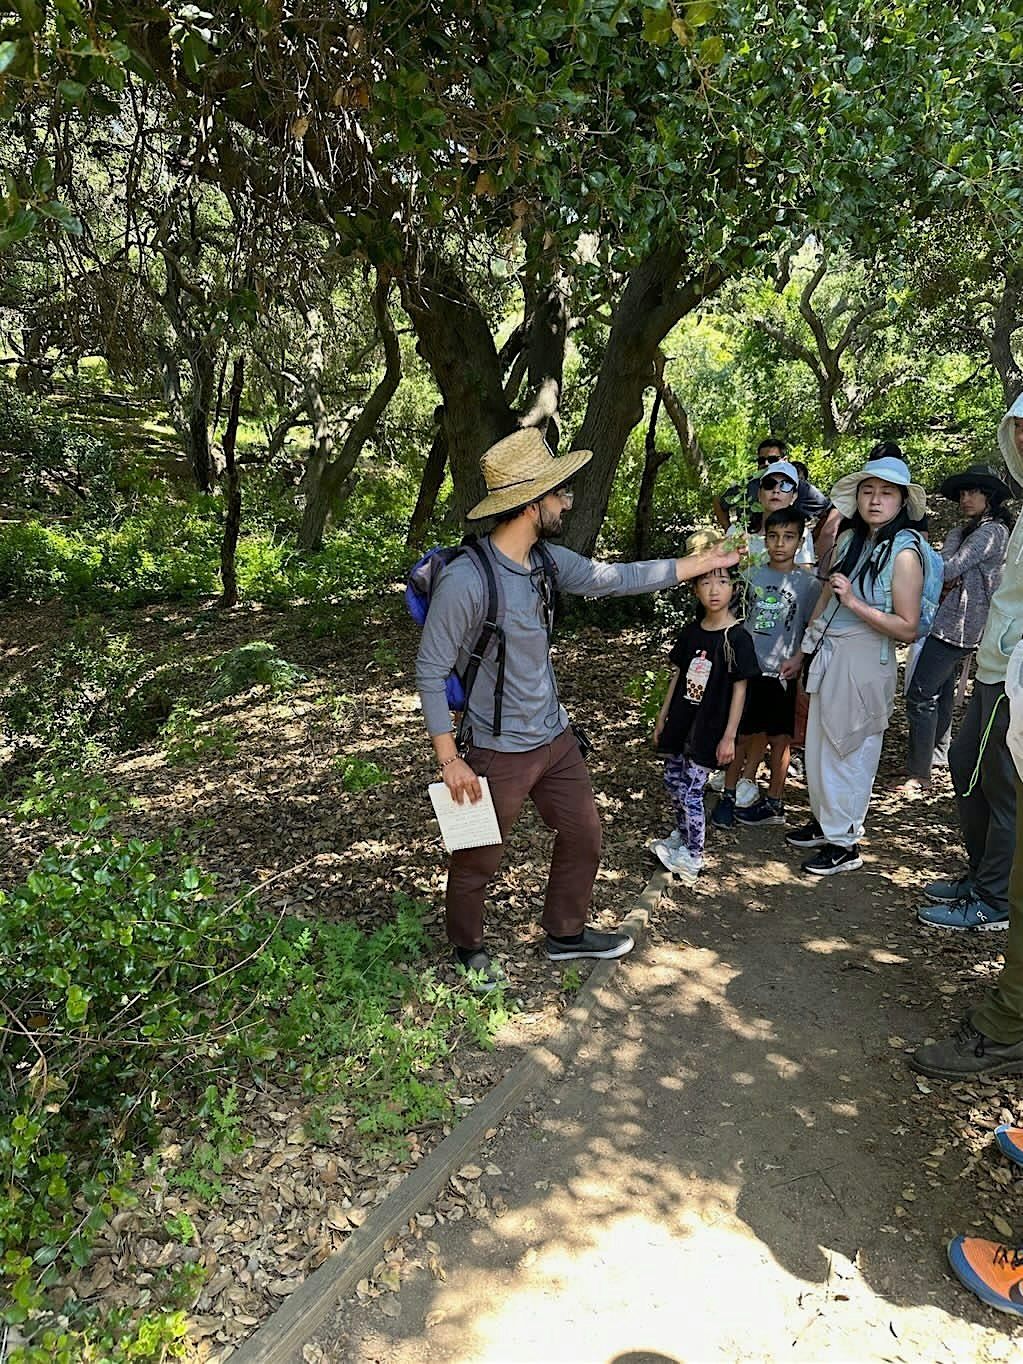 Let's Forage Plants & Fungi- Guided Nature Walk in Pasadena (Guest Speaker)